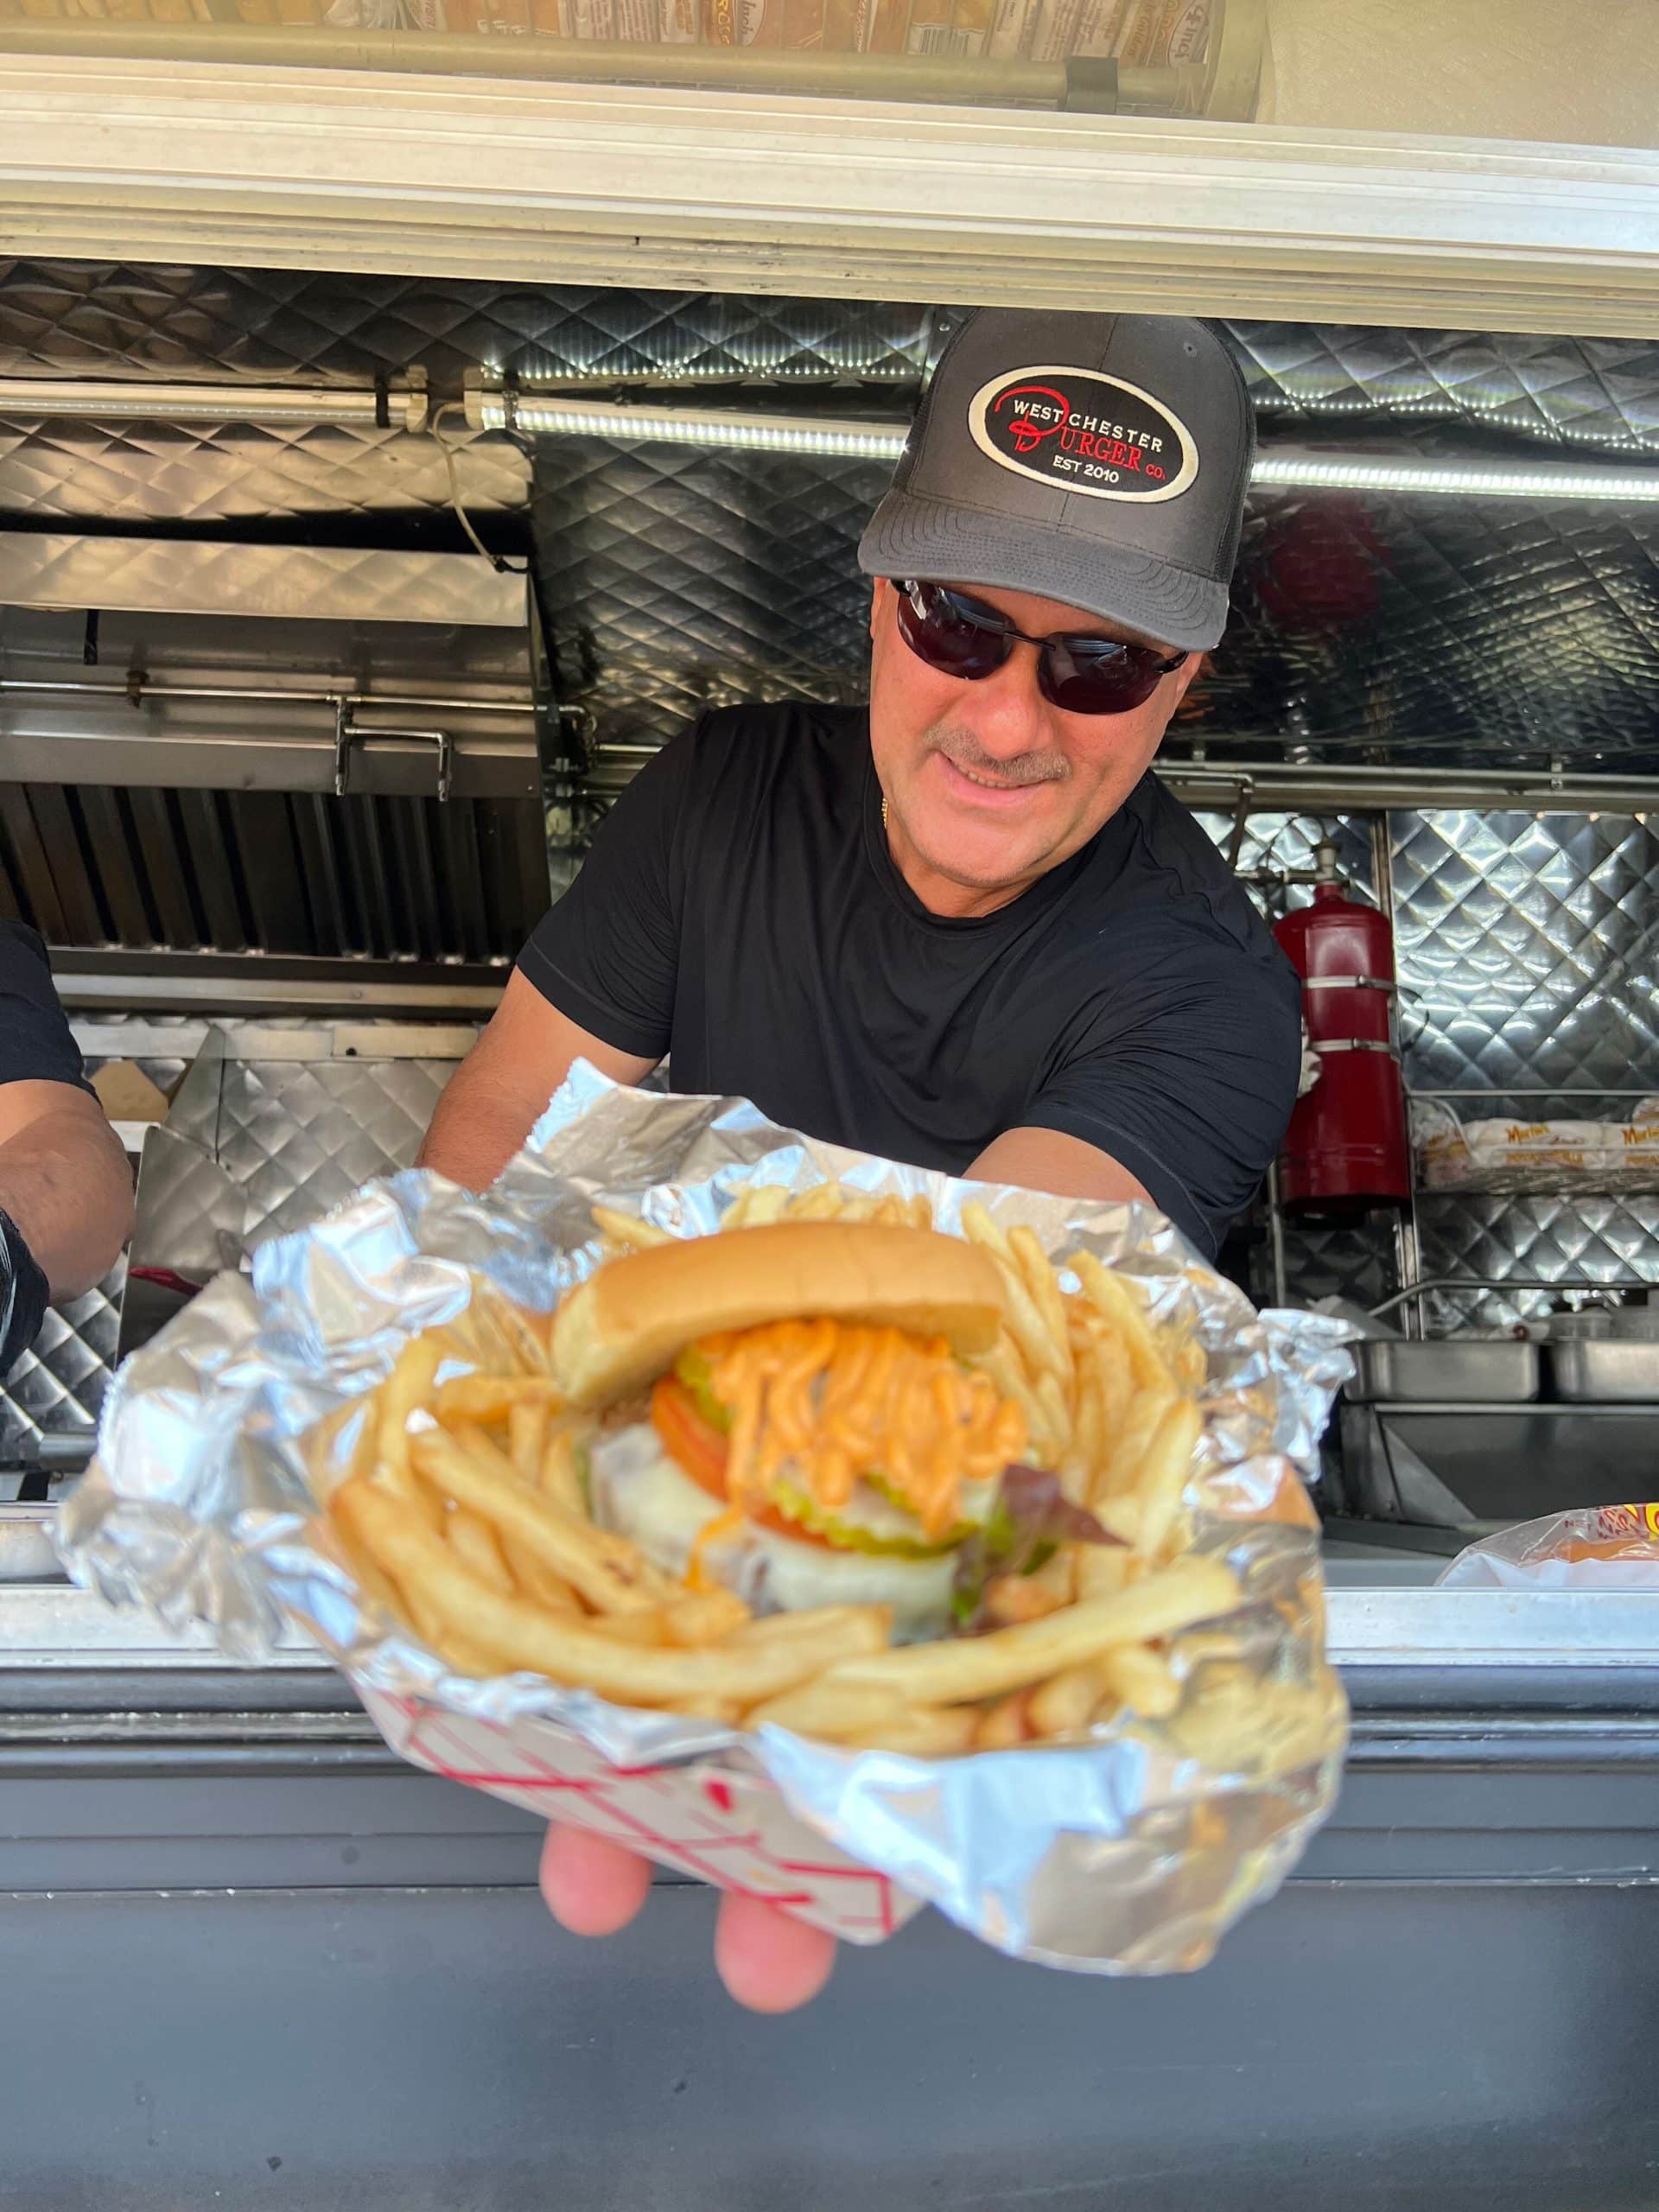 Westchester burger food truck owner holding burger from his food truck window